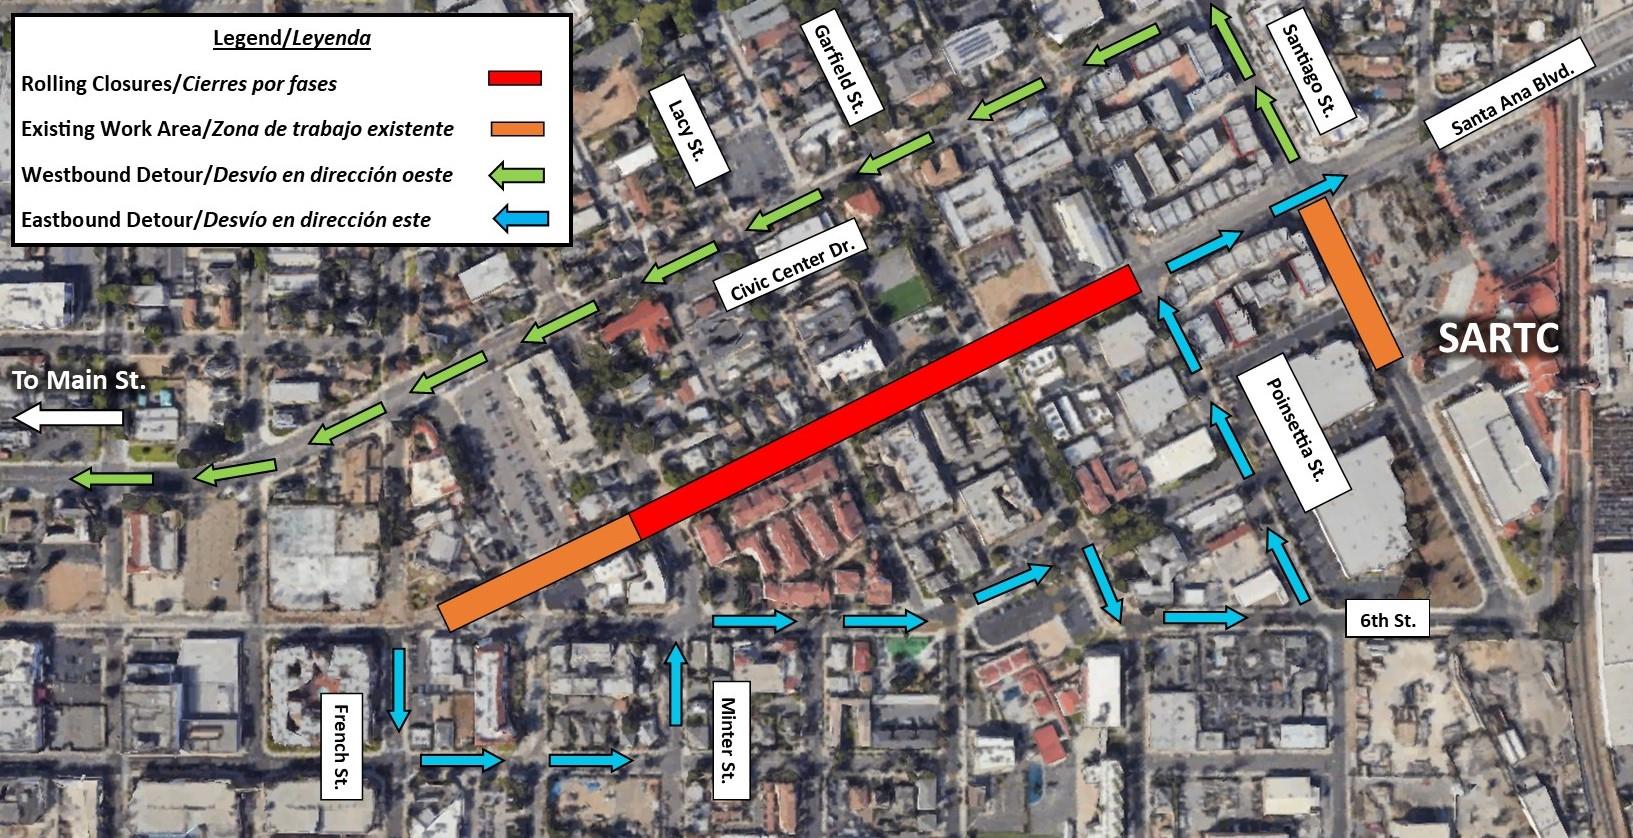 Map of rolling closures on Santa Ana Blvd.